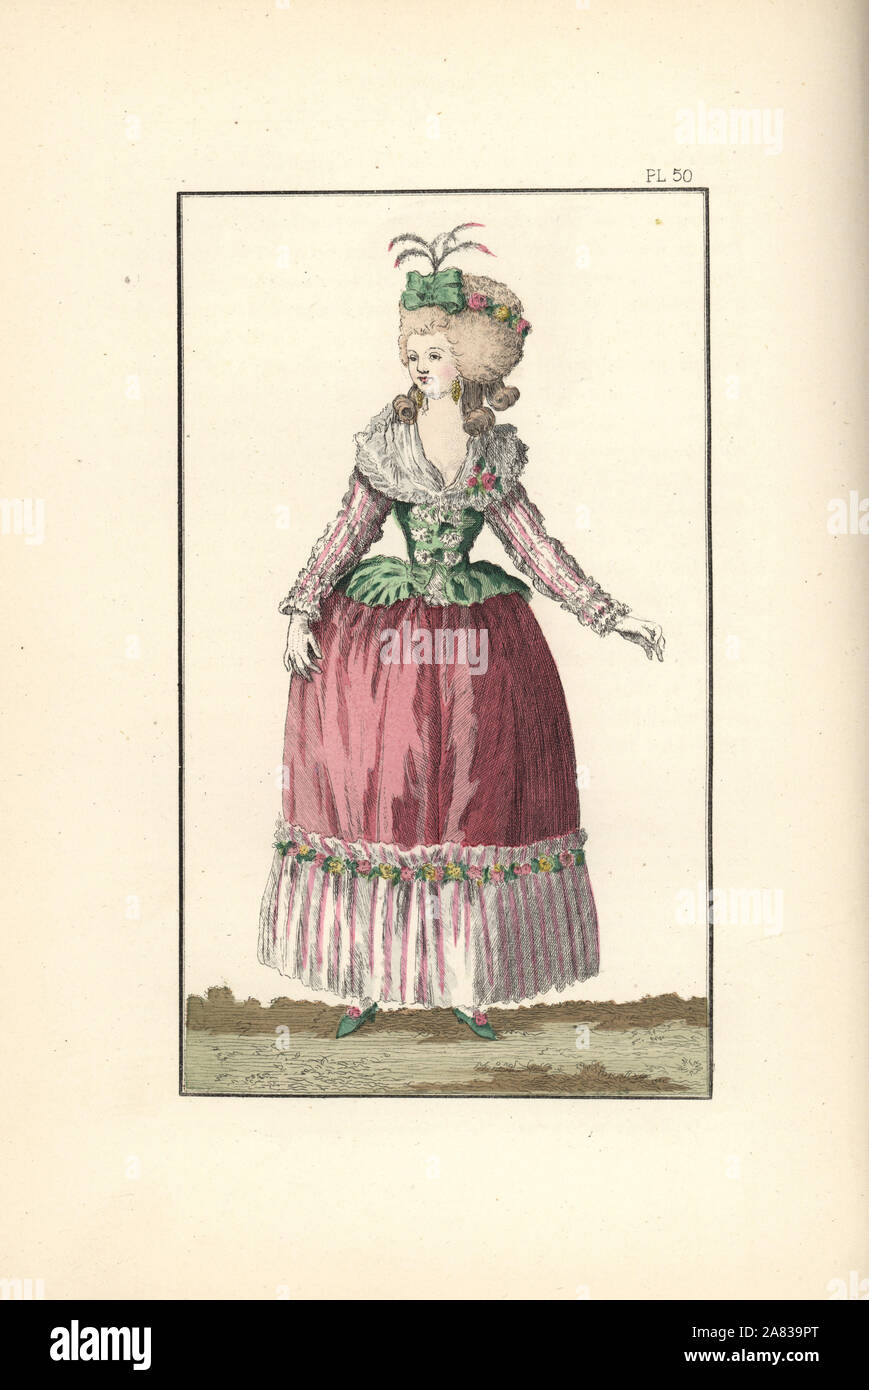 Woman dancing a minuet in apple-green caraco over a white gilet, white fichu-jabot, pink satin petticoat, and green slippers. Handcoloured lithograph from Fashions and Customs of Marie Antoinette and her Times, by Le Comte de Reiset, Paris, 1885. The journal of Madame Eloffe, dressmaker and linen-merchant to the Queen and ladies of the court. Stock Photo